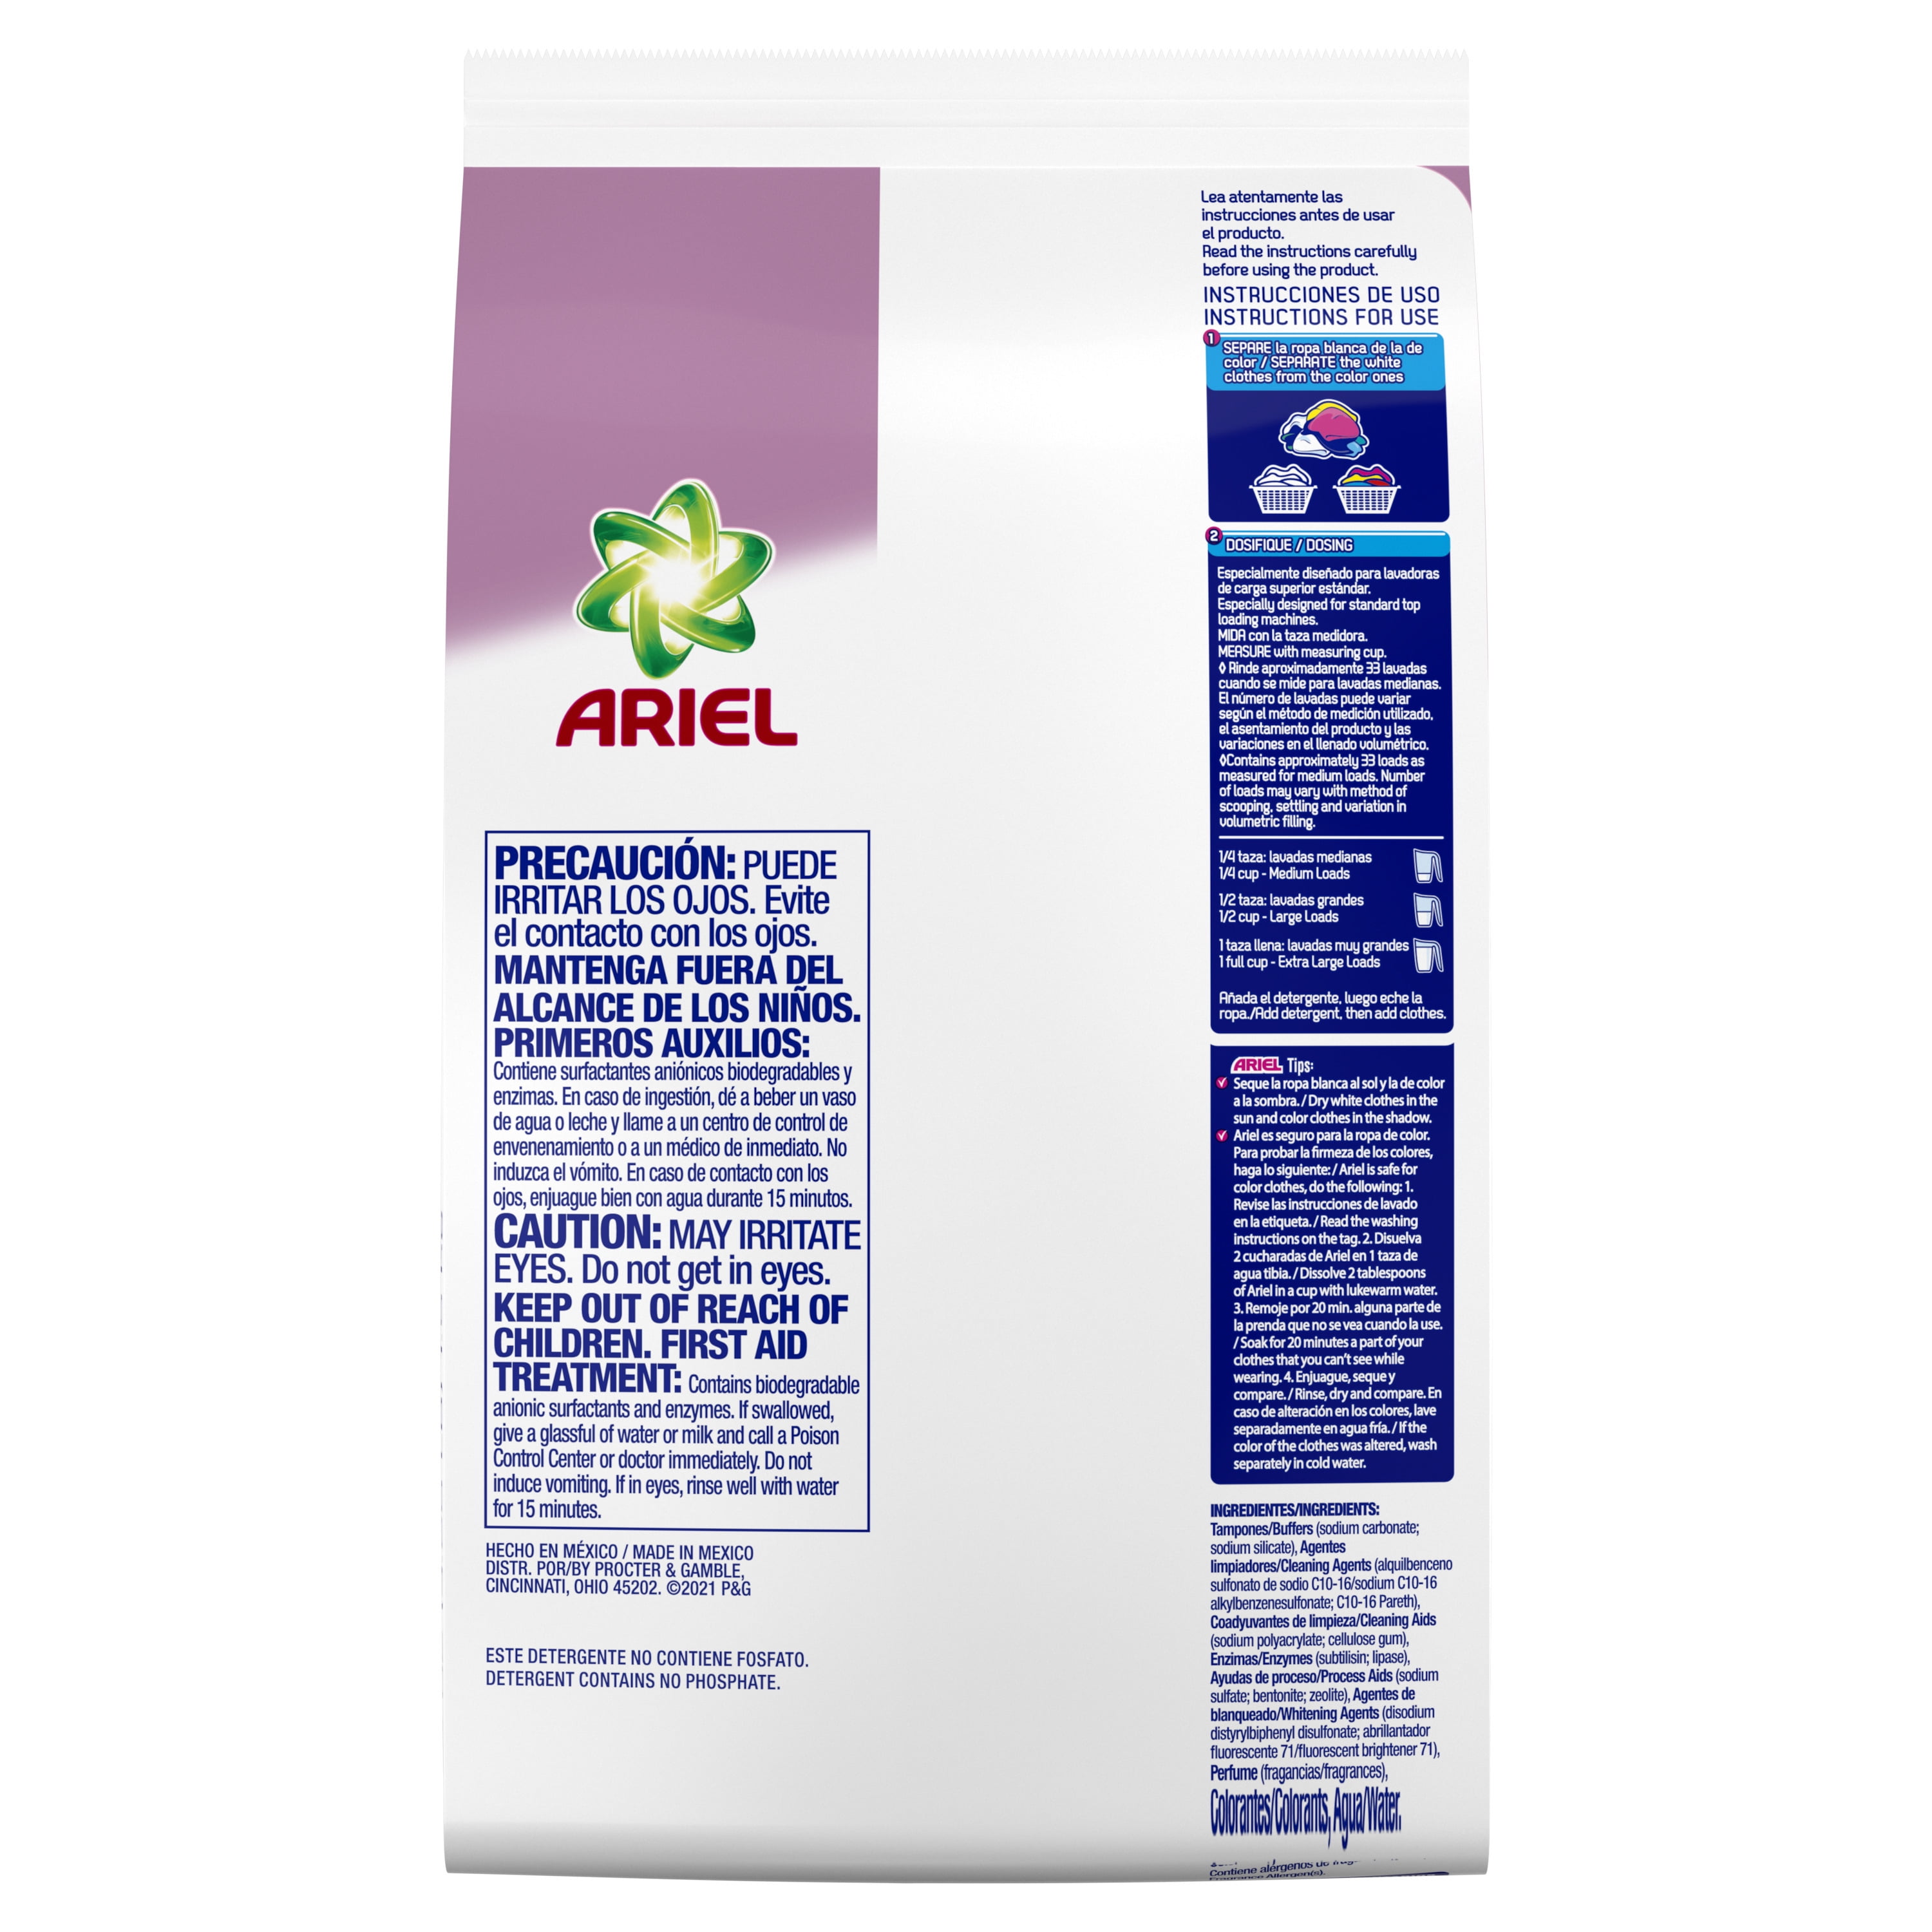 Ariel Pods + Lenor 24 Washes - 72 Doses : : Grocery